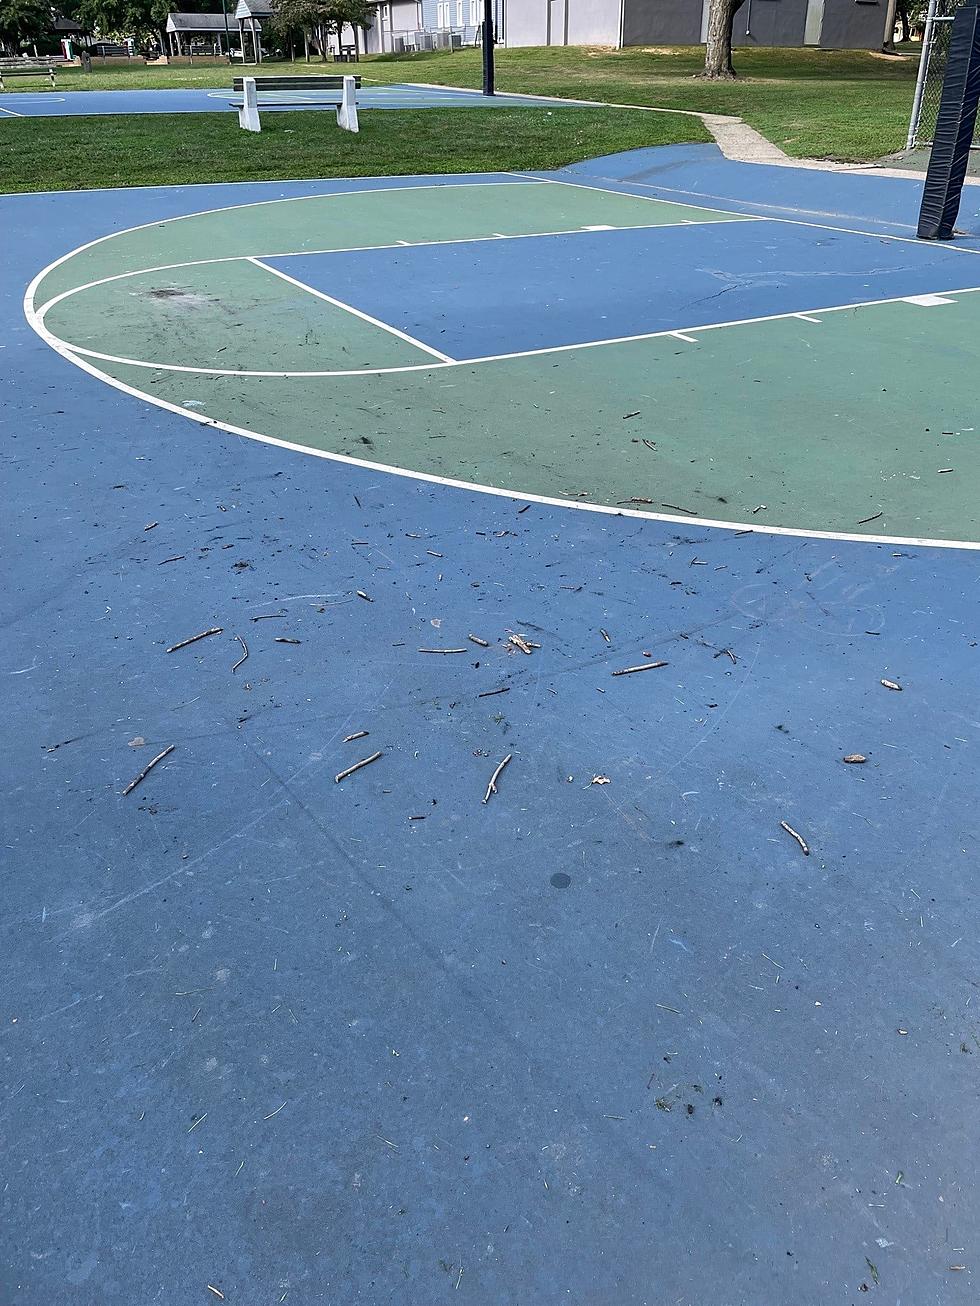 Brielle Police looking for at least 10 male teenagers who set fires to basketball courts